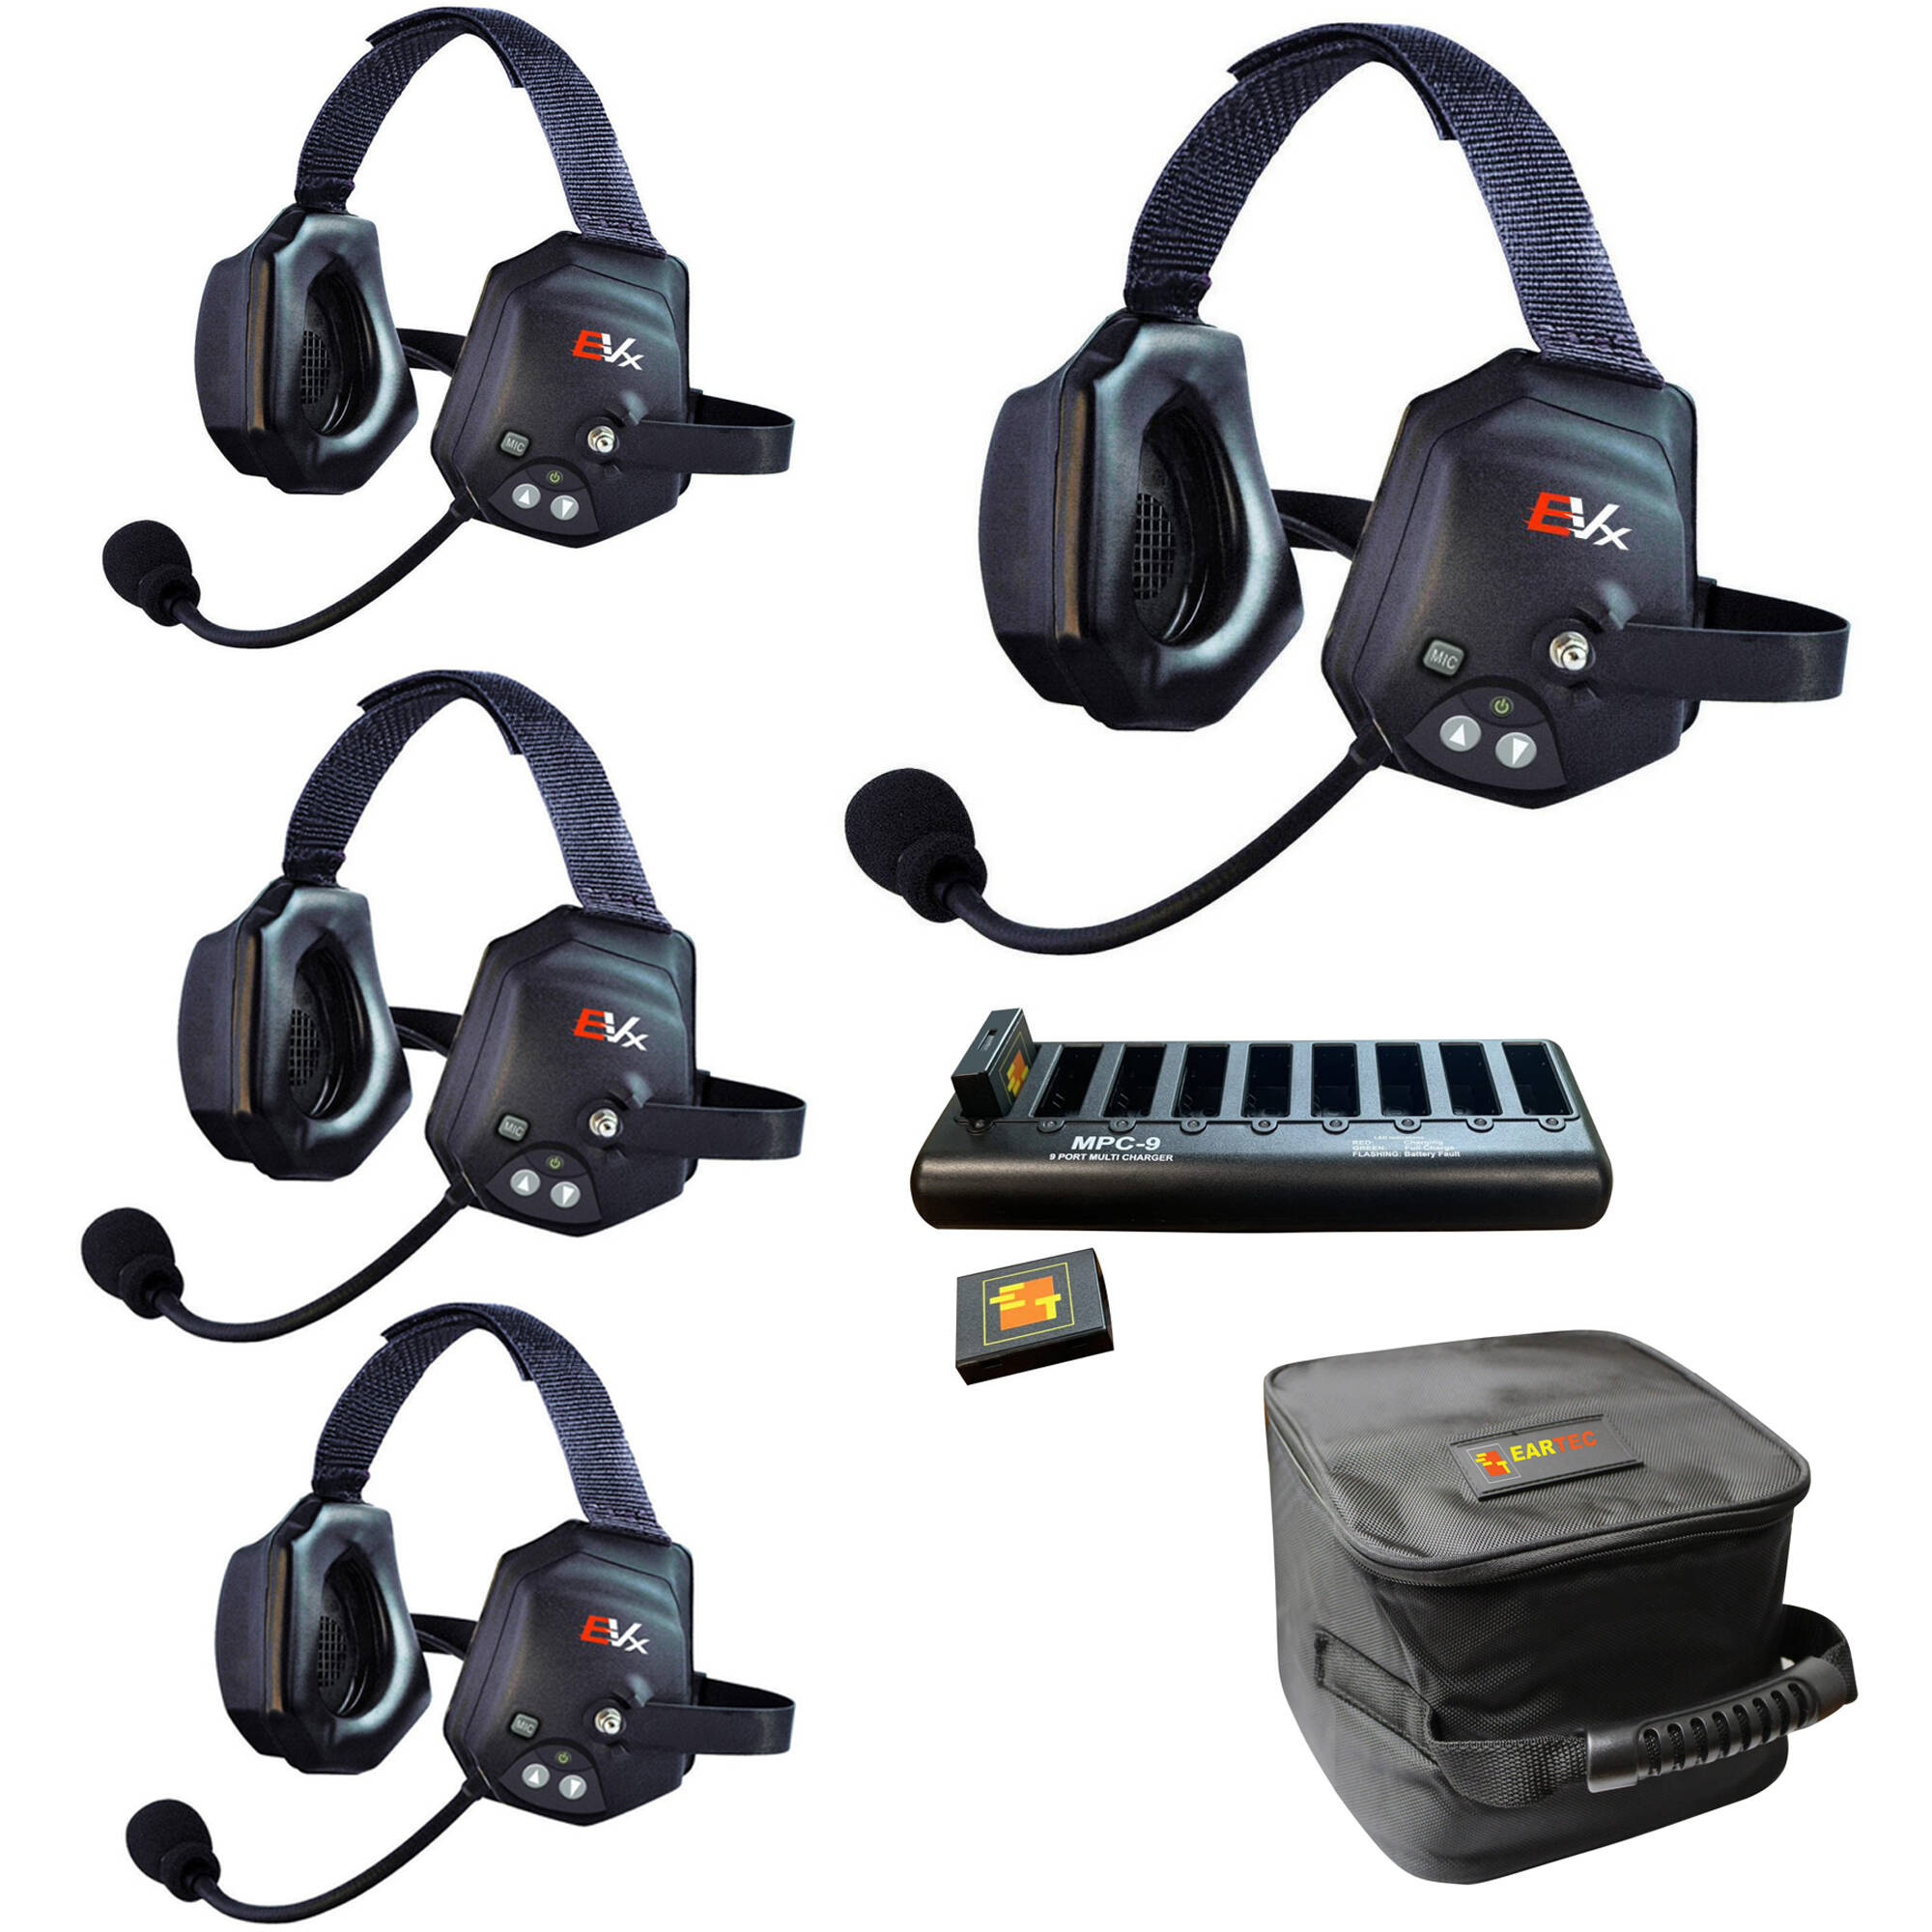 Eartec EVADE XTreme EVXT4 Industrial Full-Duplex Wireless Intercom System with 4 Dual-Ear Headsets